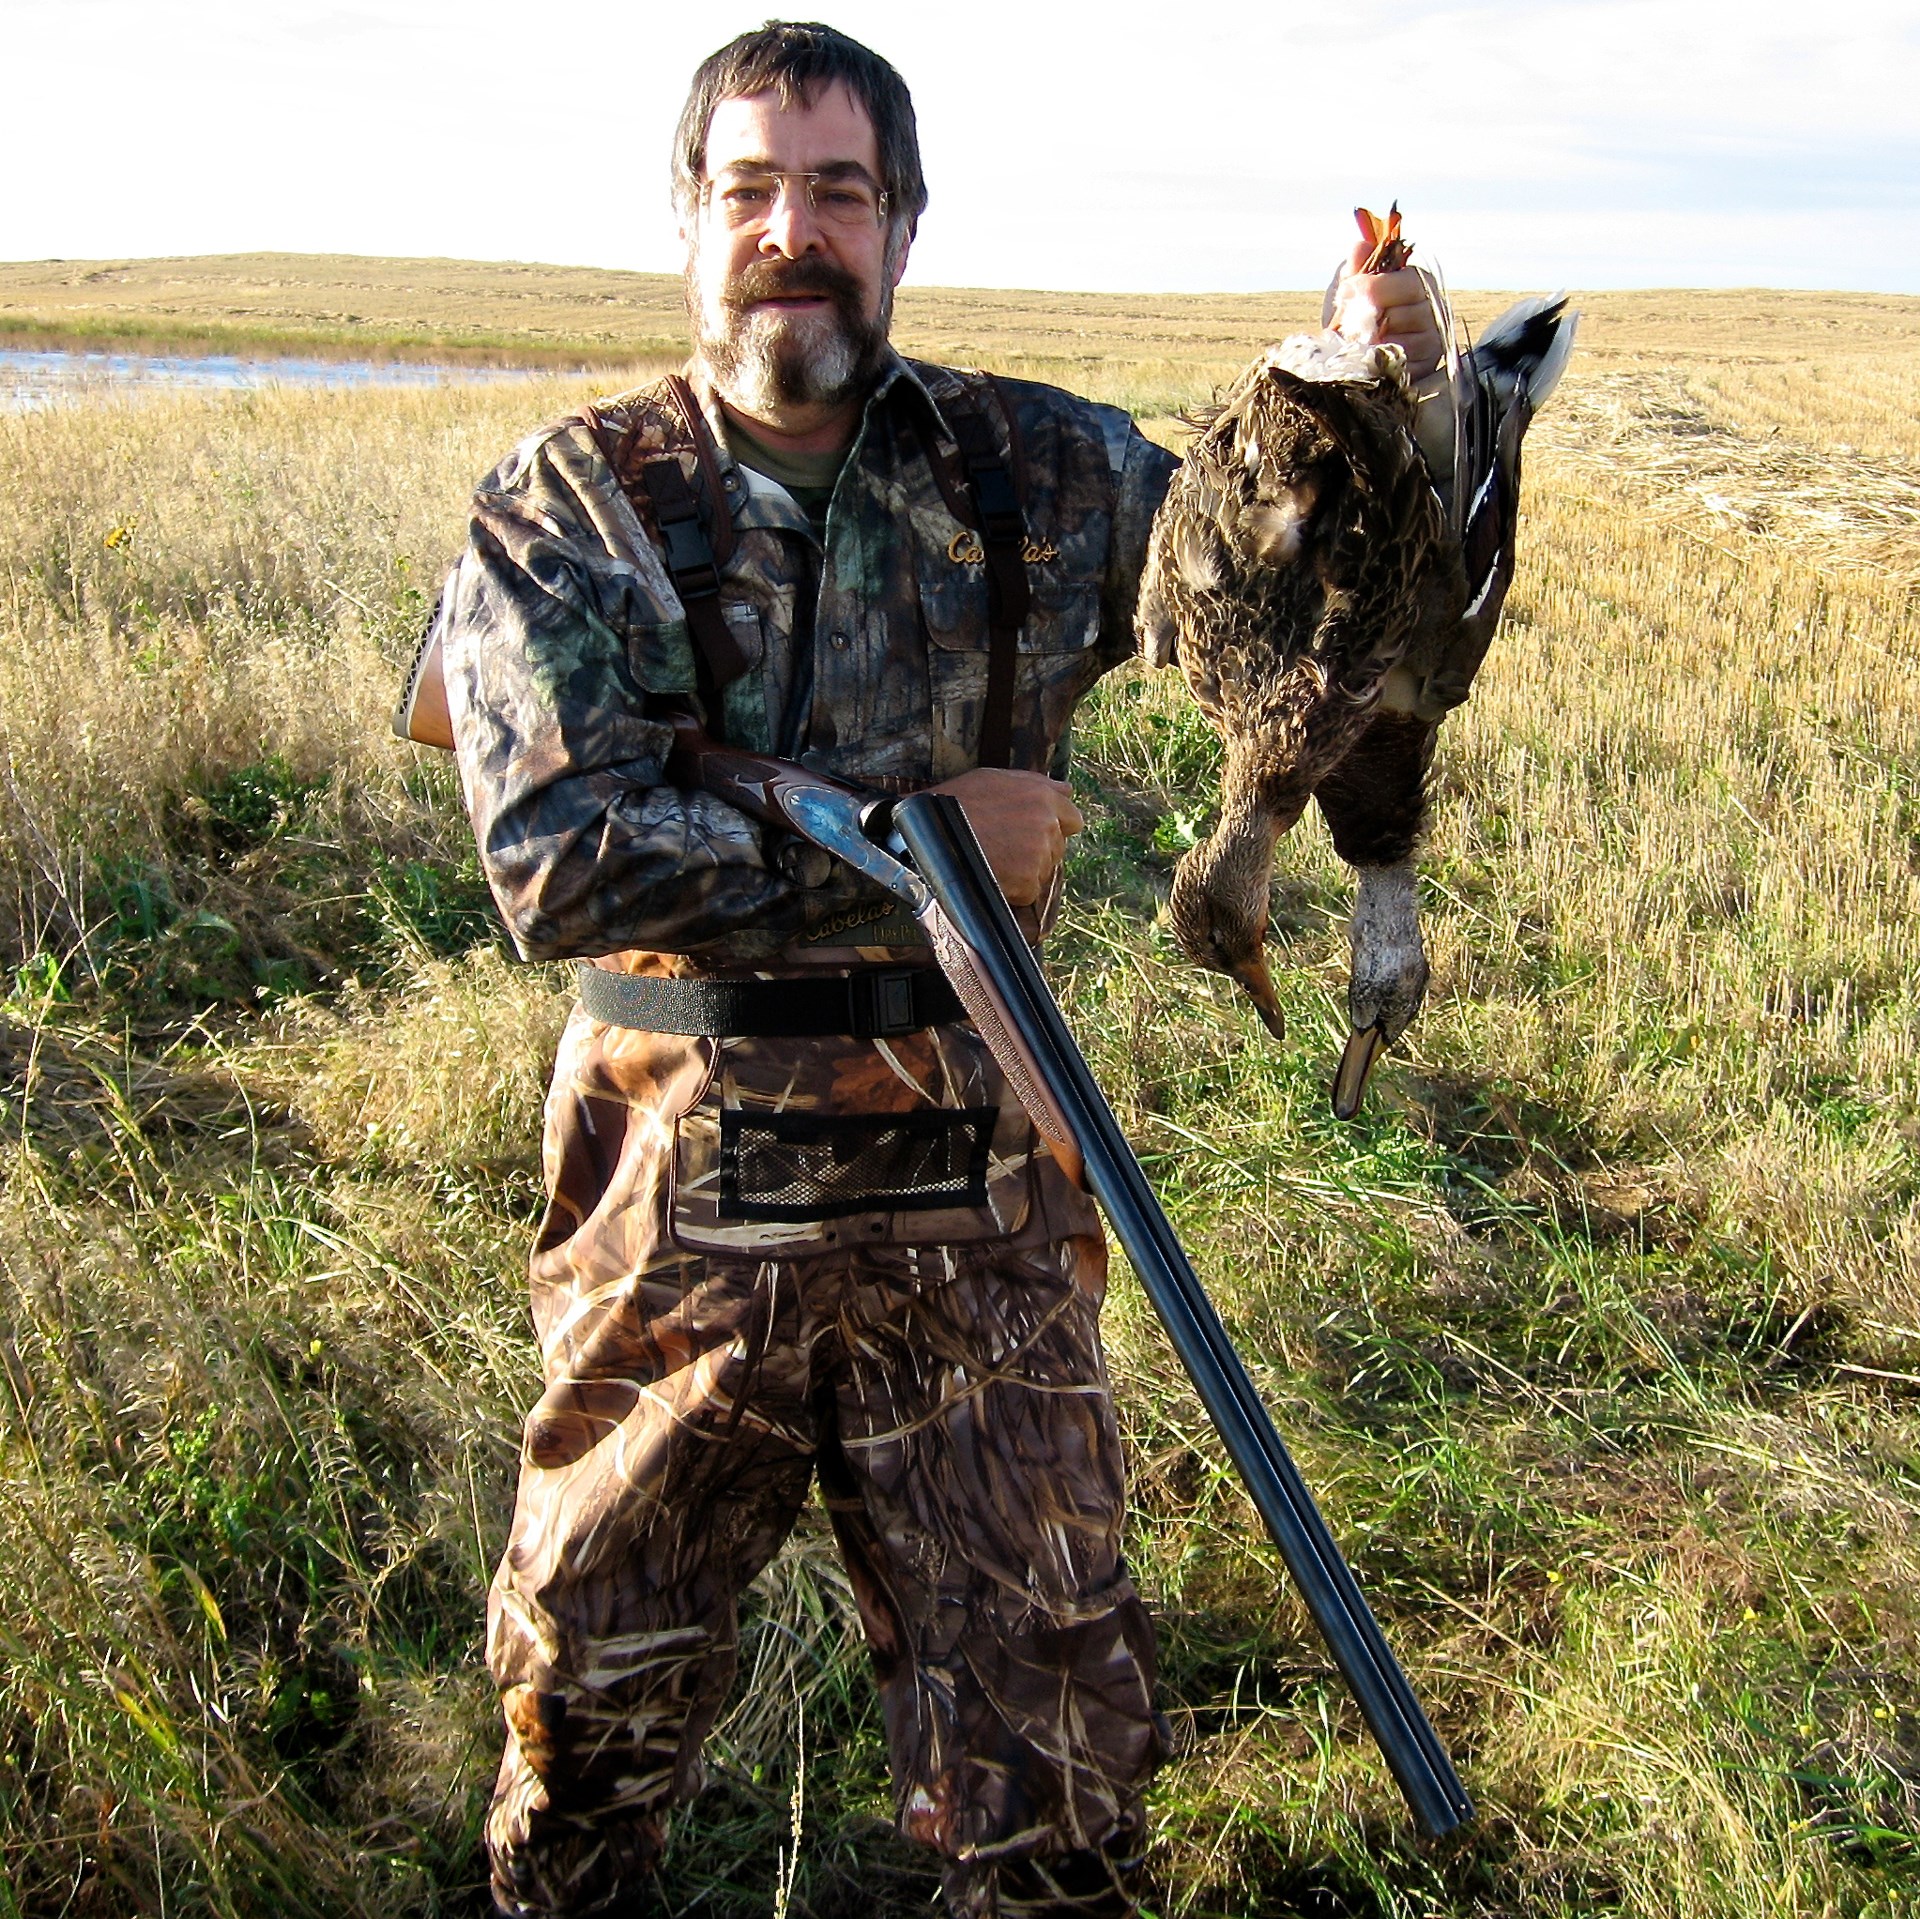 Man outdoors weilding shotgun and ducks On an Alberta, Canada, duck hunt, Hacker used Marlin’s Italian-made Fausti Stefano boxlock interpretation of an L.C. Smith with faux sidelock plates to make a double on ducks. The gun, no longer made, performed well and may still be available on the secondary market, but it doesn’t have the collectability of the original L.C. Smith sidelocks.